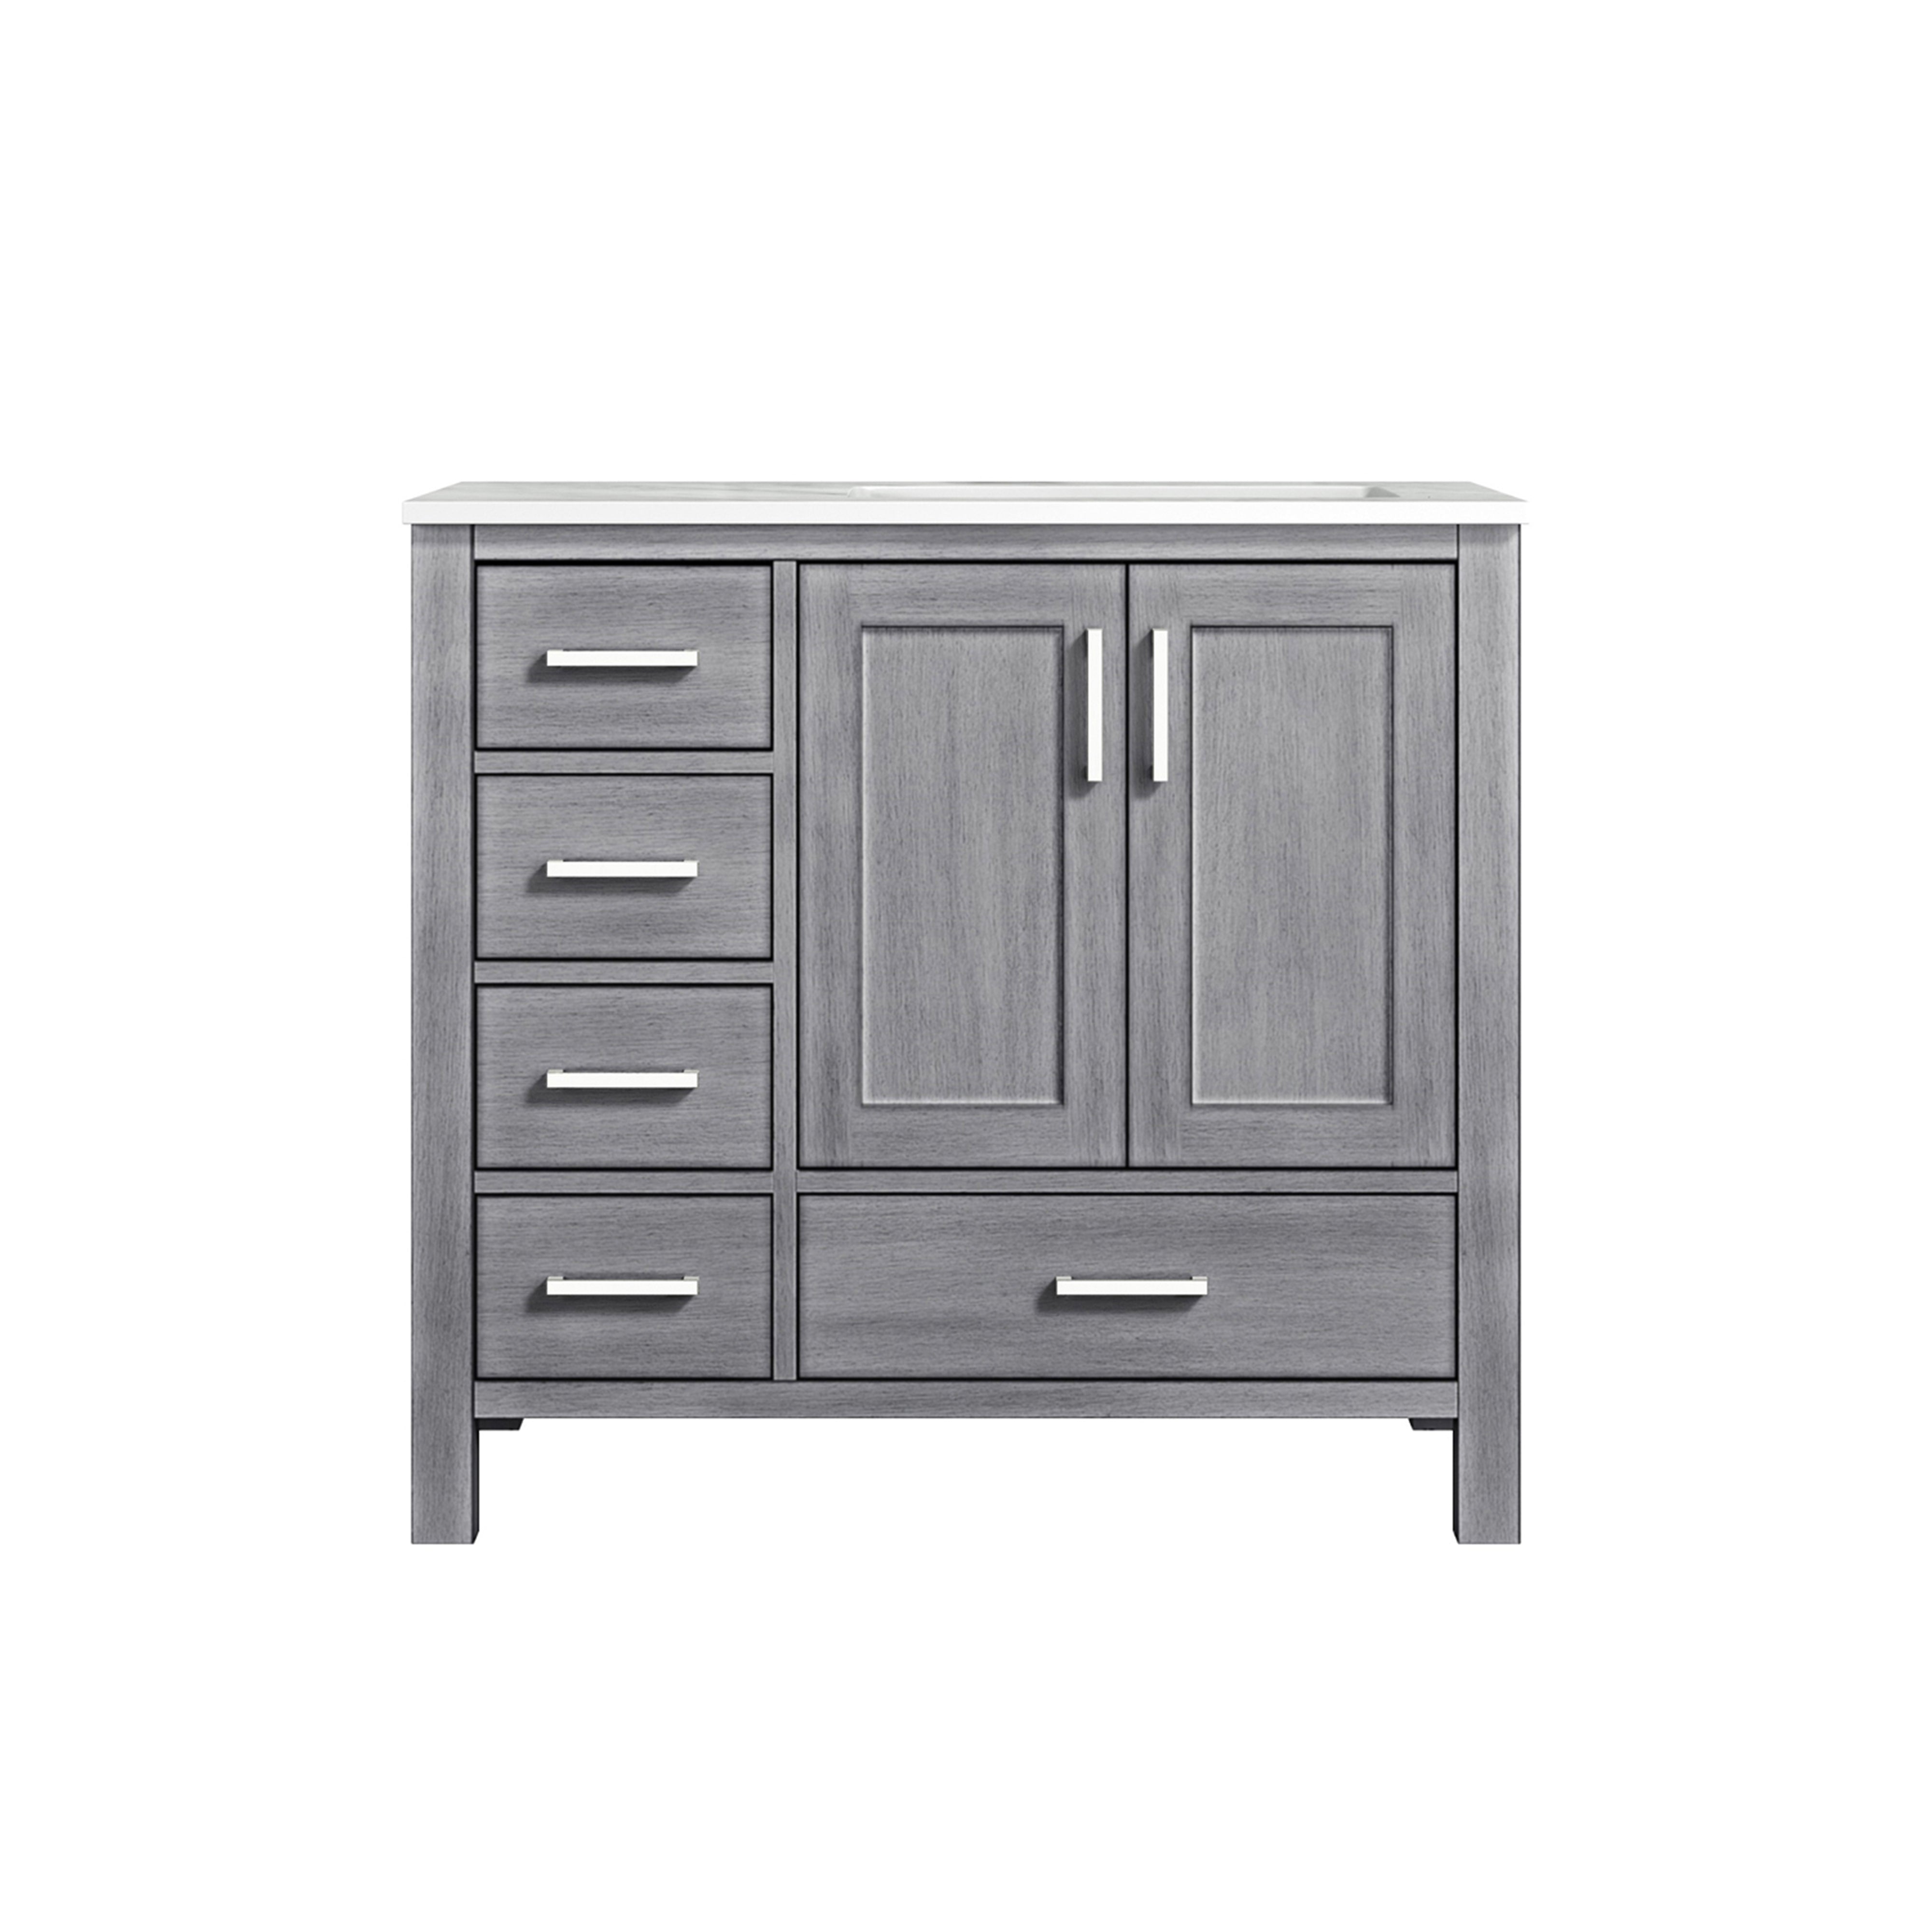 Lexora Jacques LJ342236SDDS000-R 36" Single Bathroom Vanity in Distressed Grey with White Carrara Marble, White Rectangle Sink on Right, Front VIew